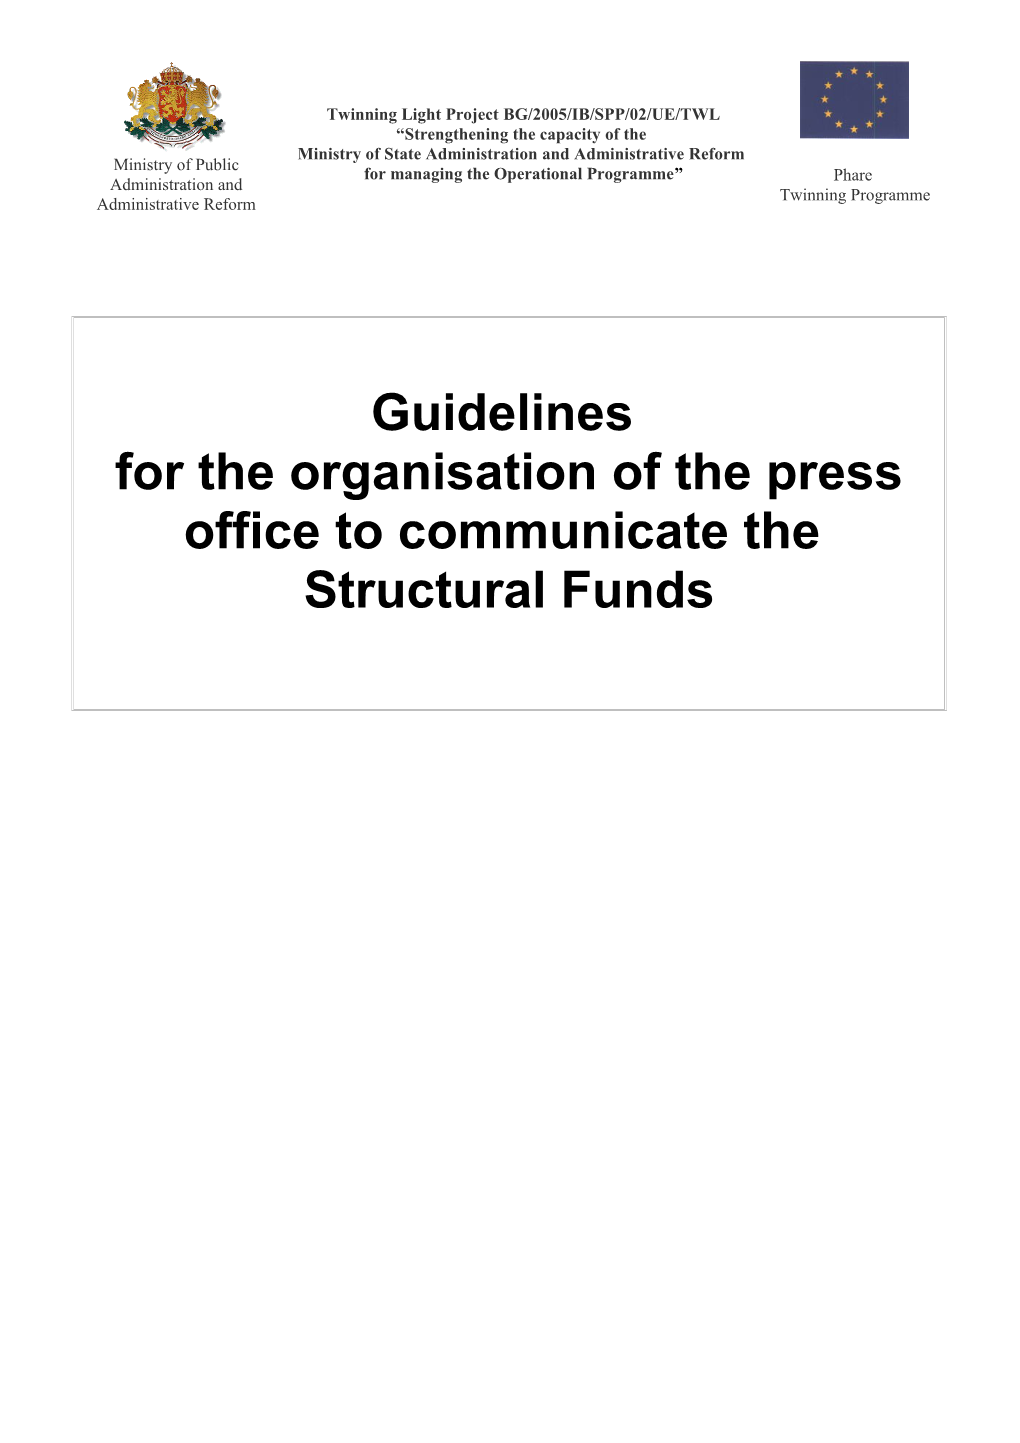 Guidelines for Communication Action Plans